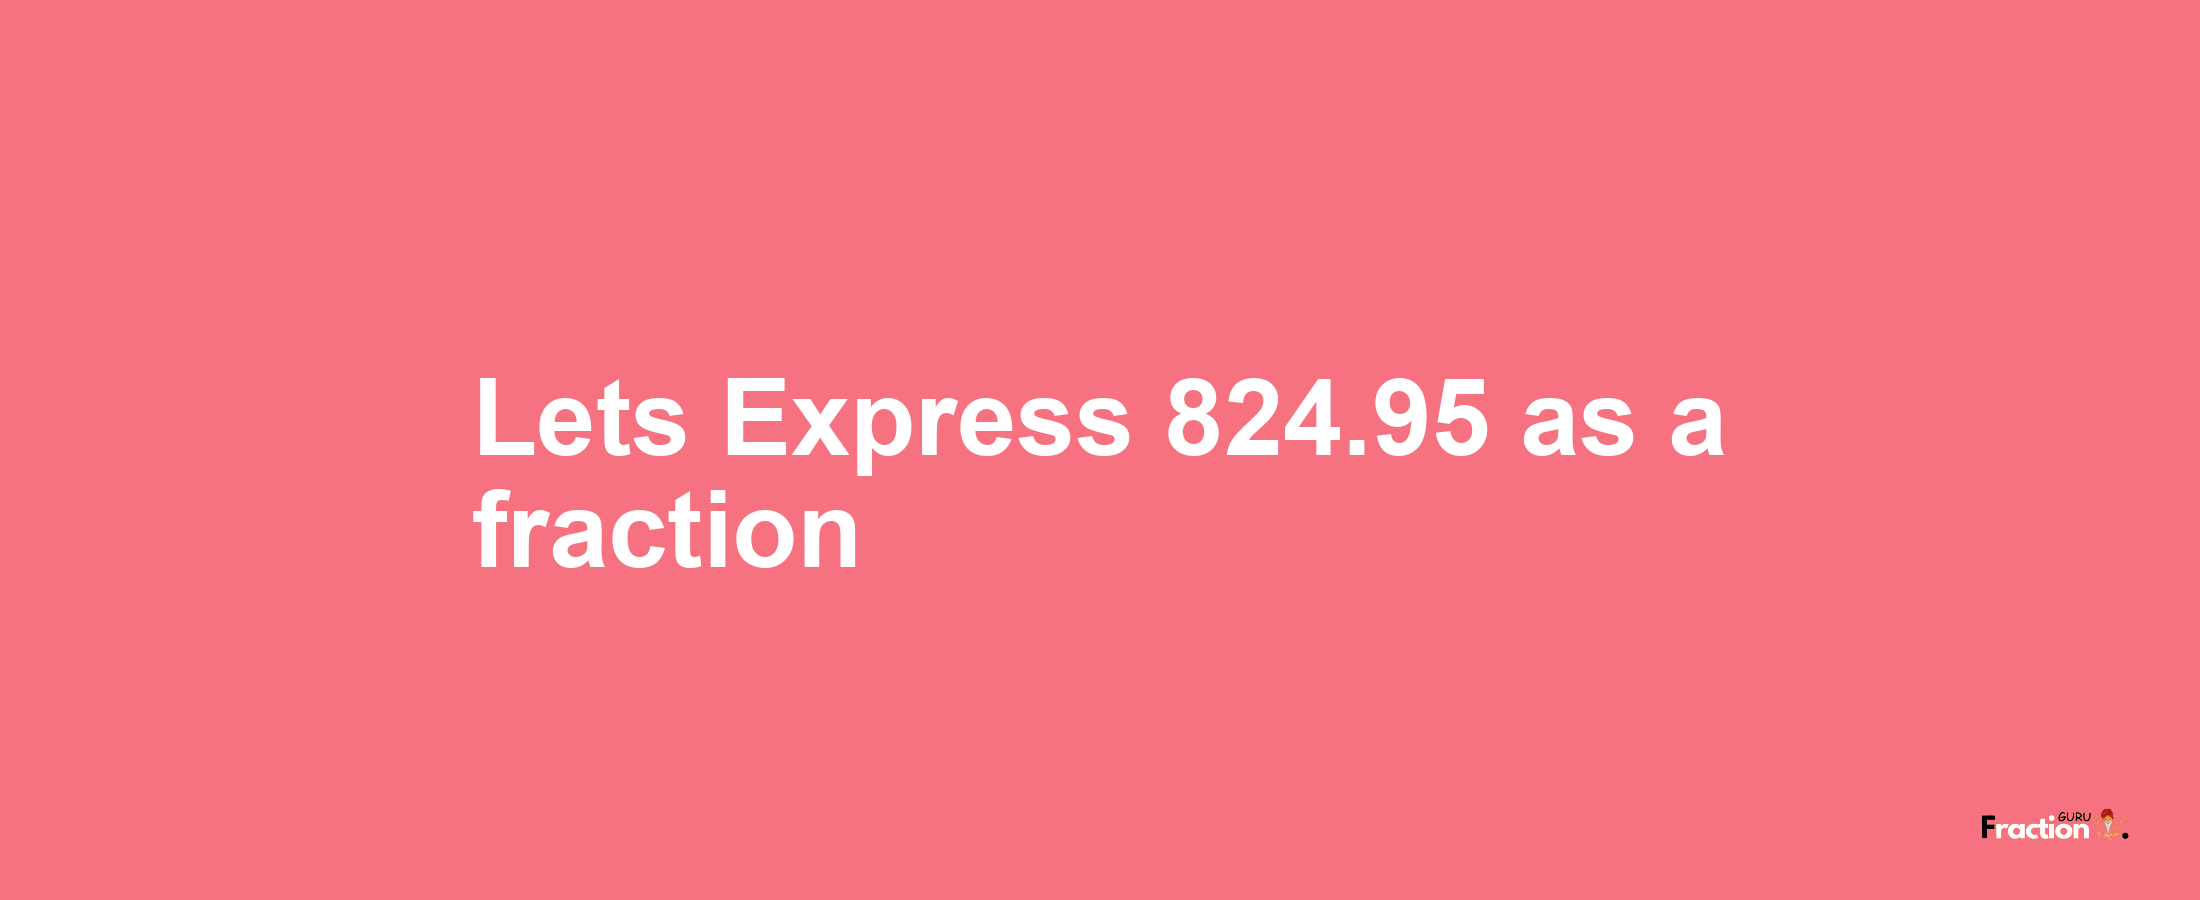 Lets Express 824.95 as afraction